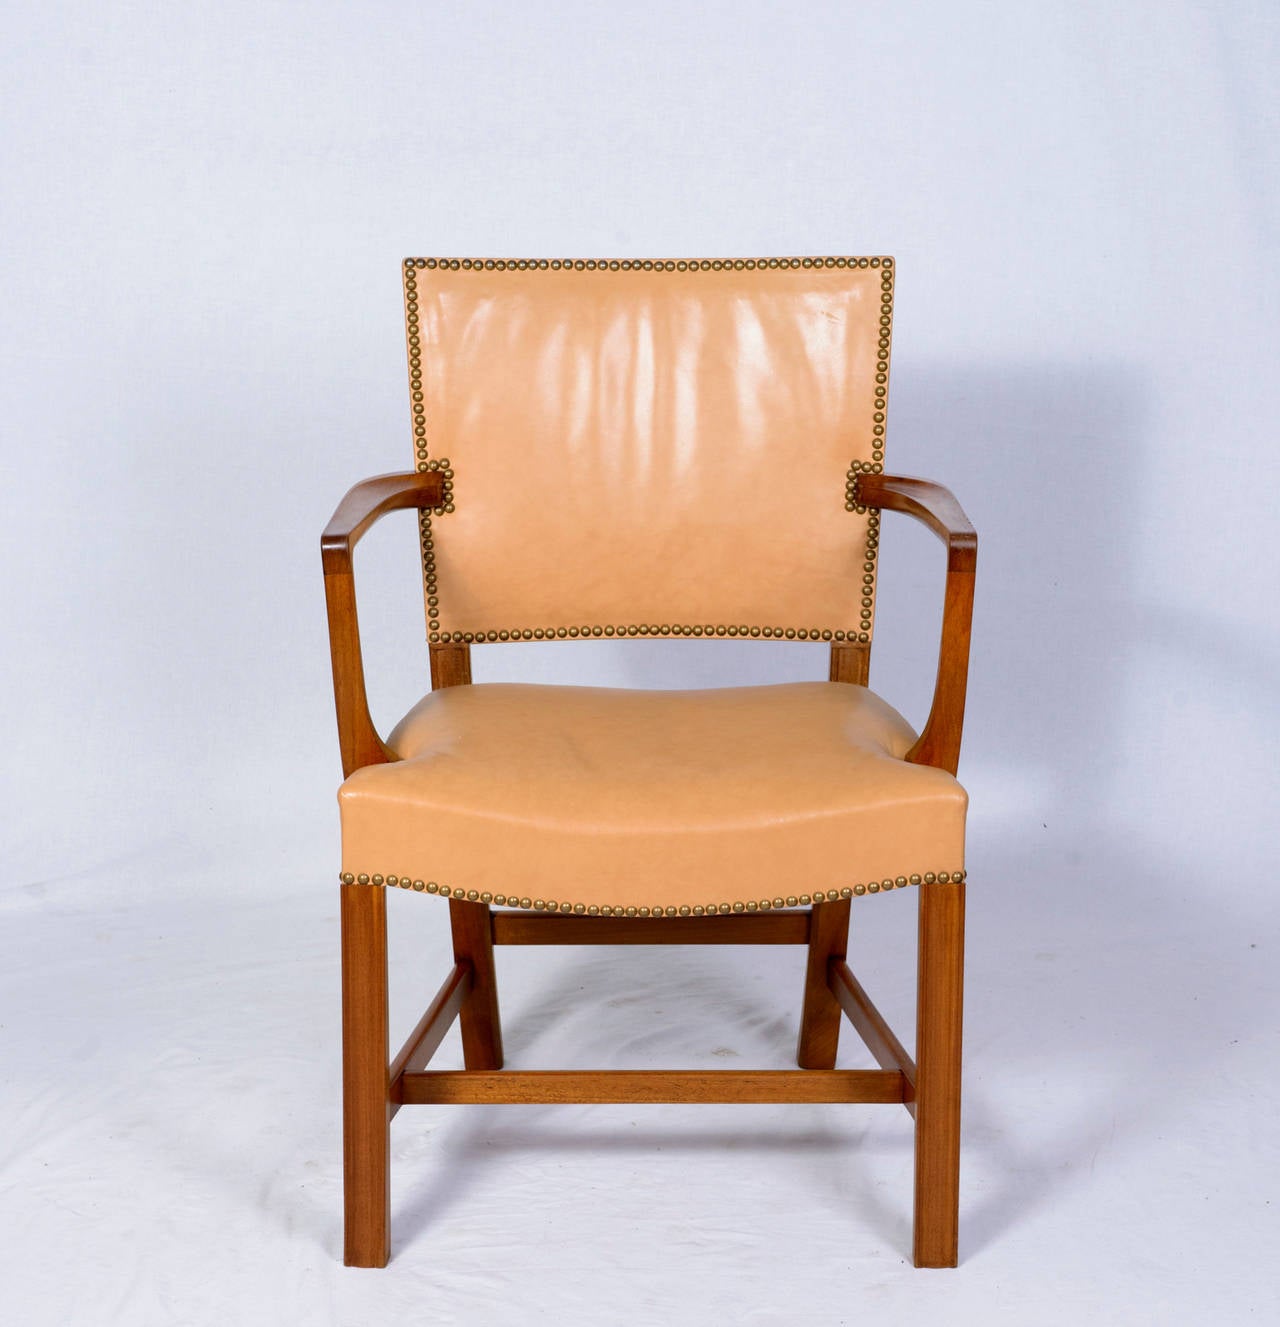 Pair of Kaare Klint armchairs designed in 1927 and produced by Rud Rasmussen.   Store formerly known as ARTFUL DODGER INC